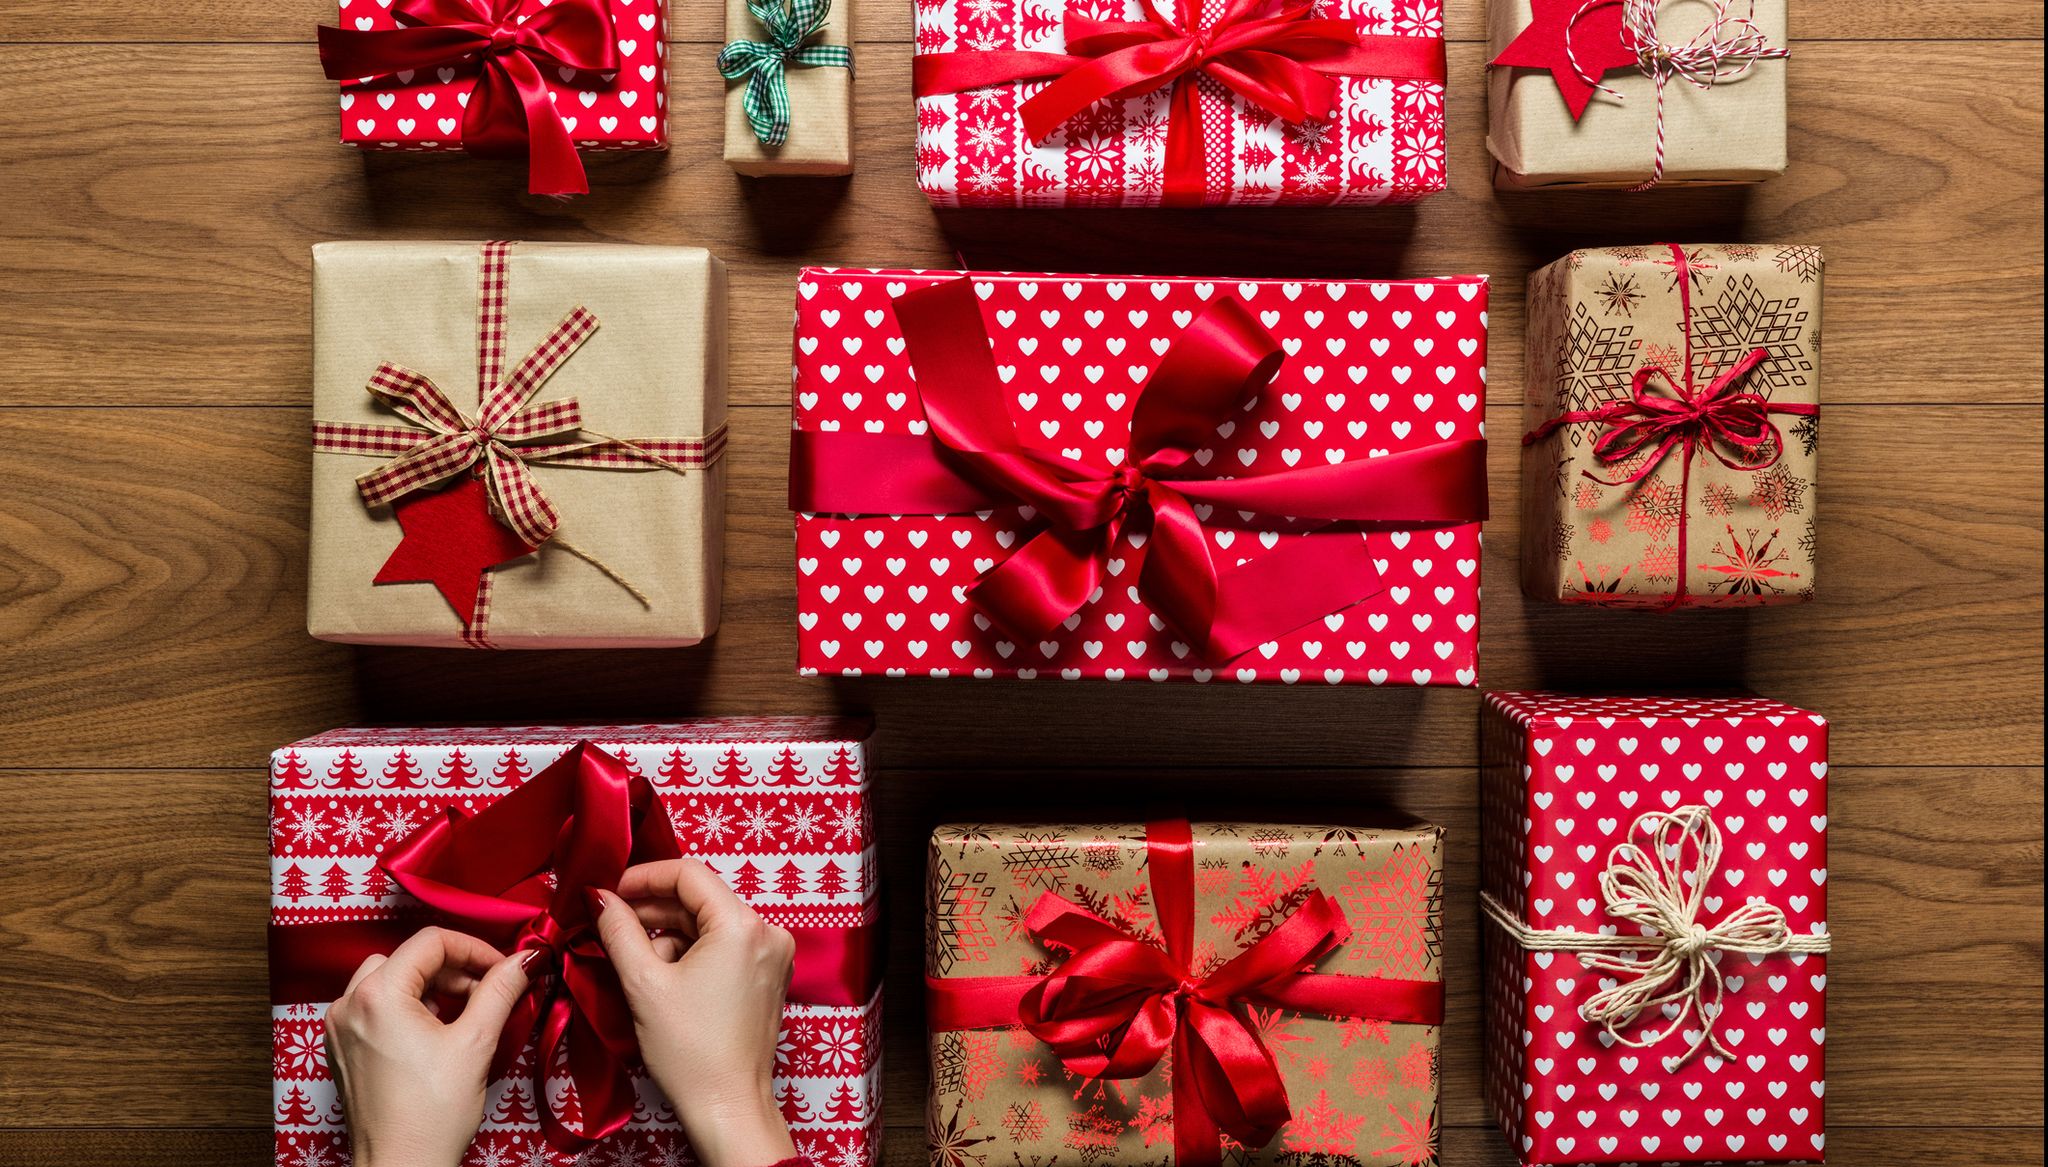 https://hips.hearstapps.com/hmg-prod/images/cropped-hands-of-woman-arranging-christmas-presents-royalty-free-image-889538316-1544619359.jpg?crop=1.00xw:0.855xh;0.00173xw,0.0805xh&resize=2048:*